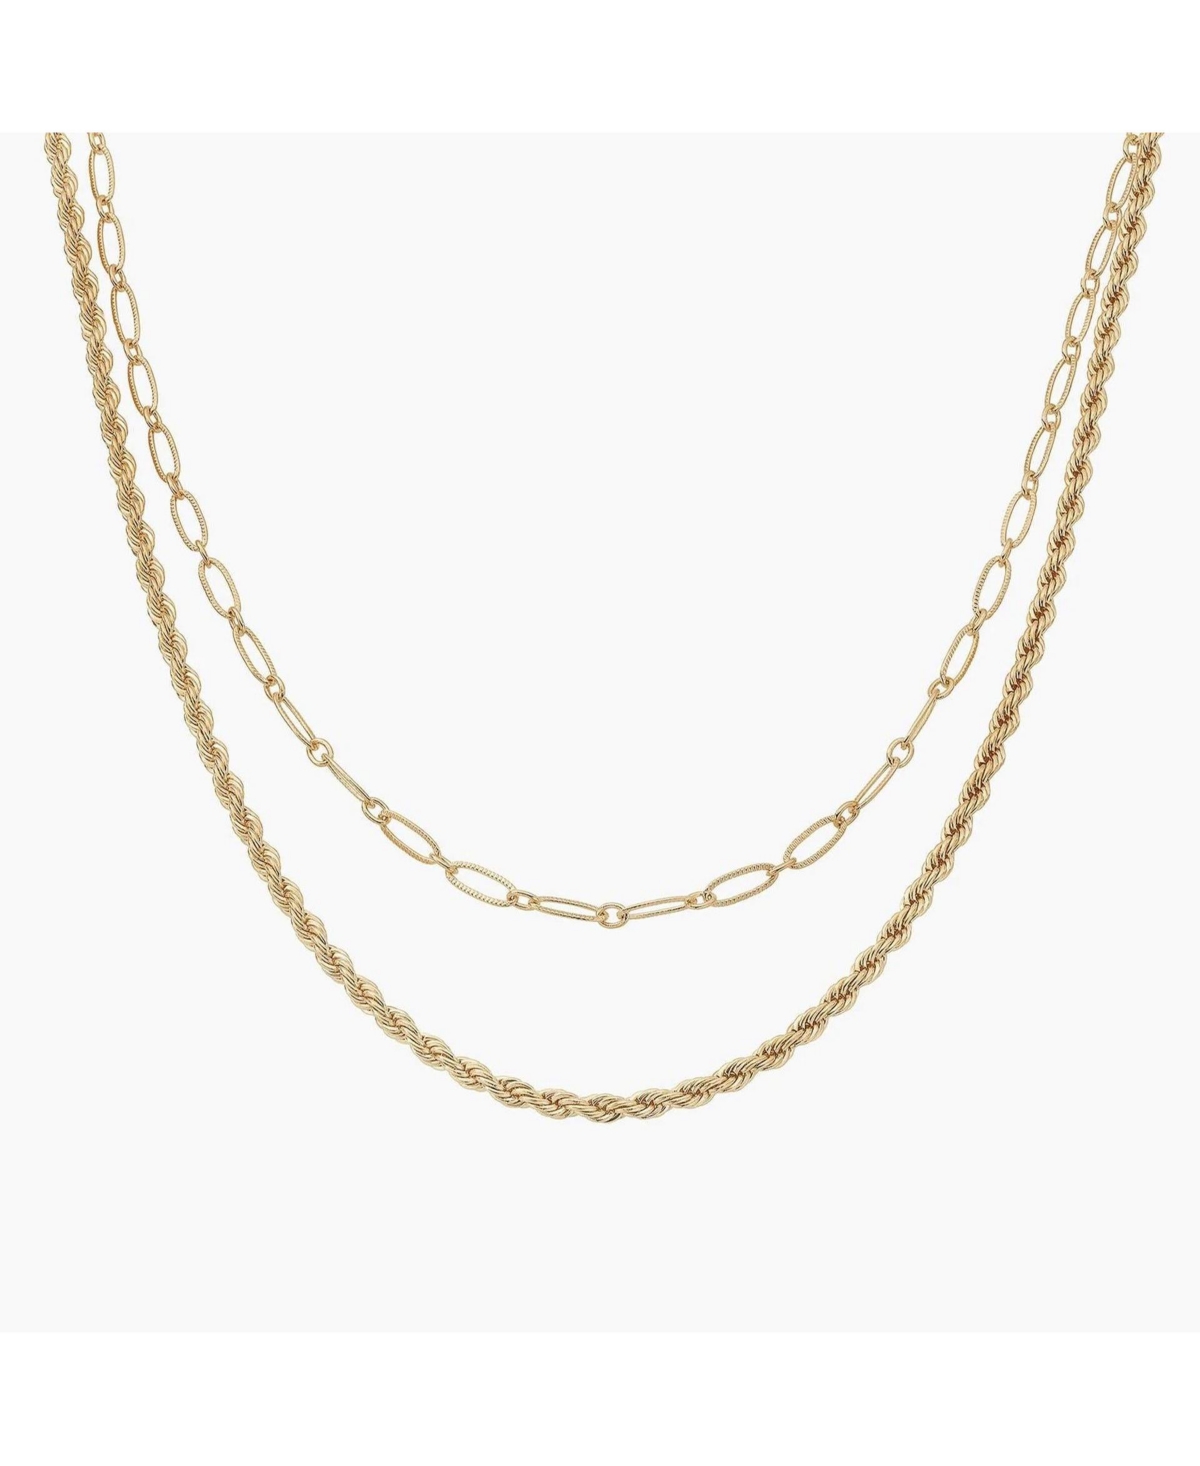 Chain and Rope Layered Necklace - Gold